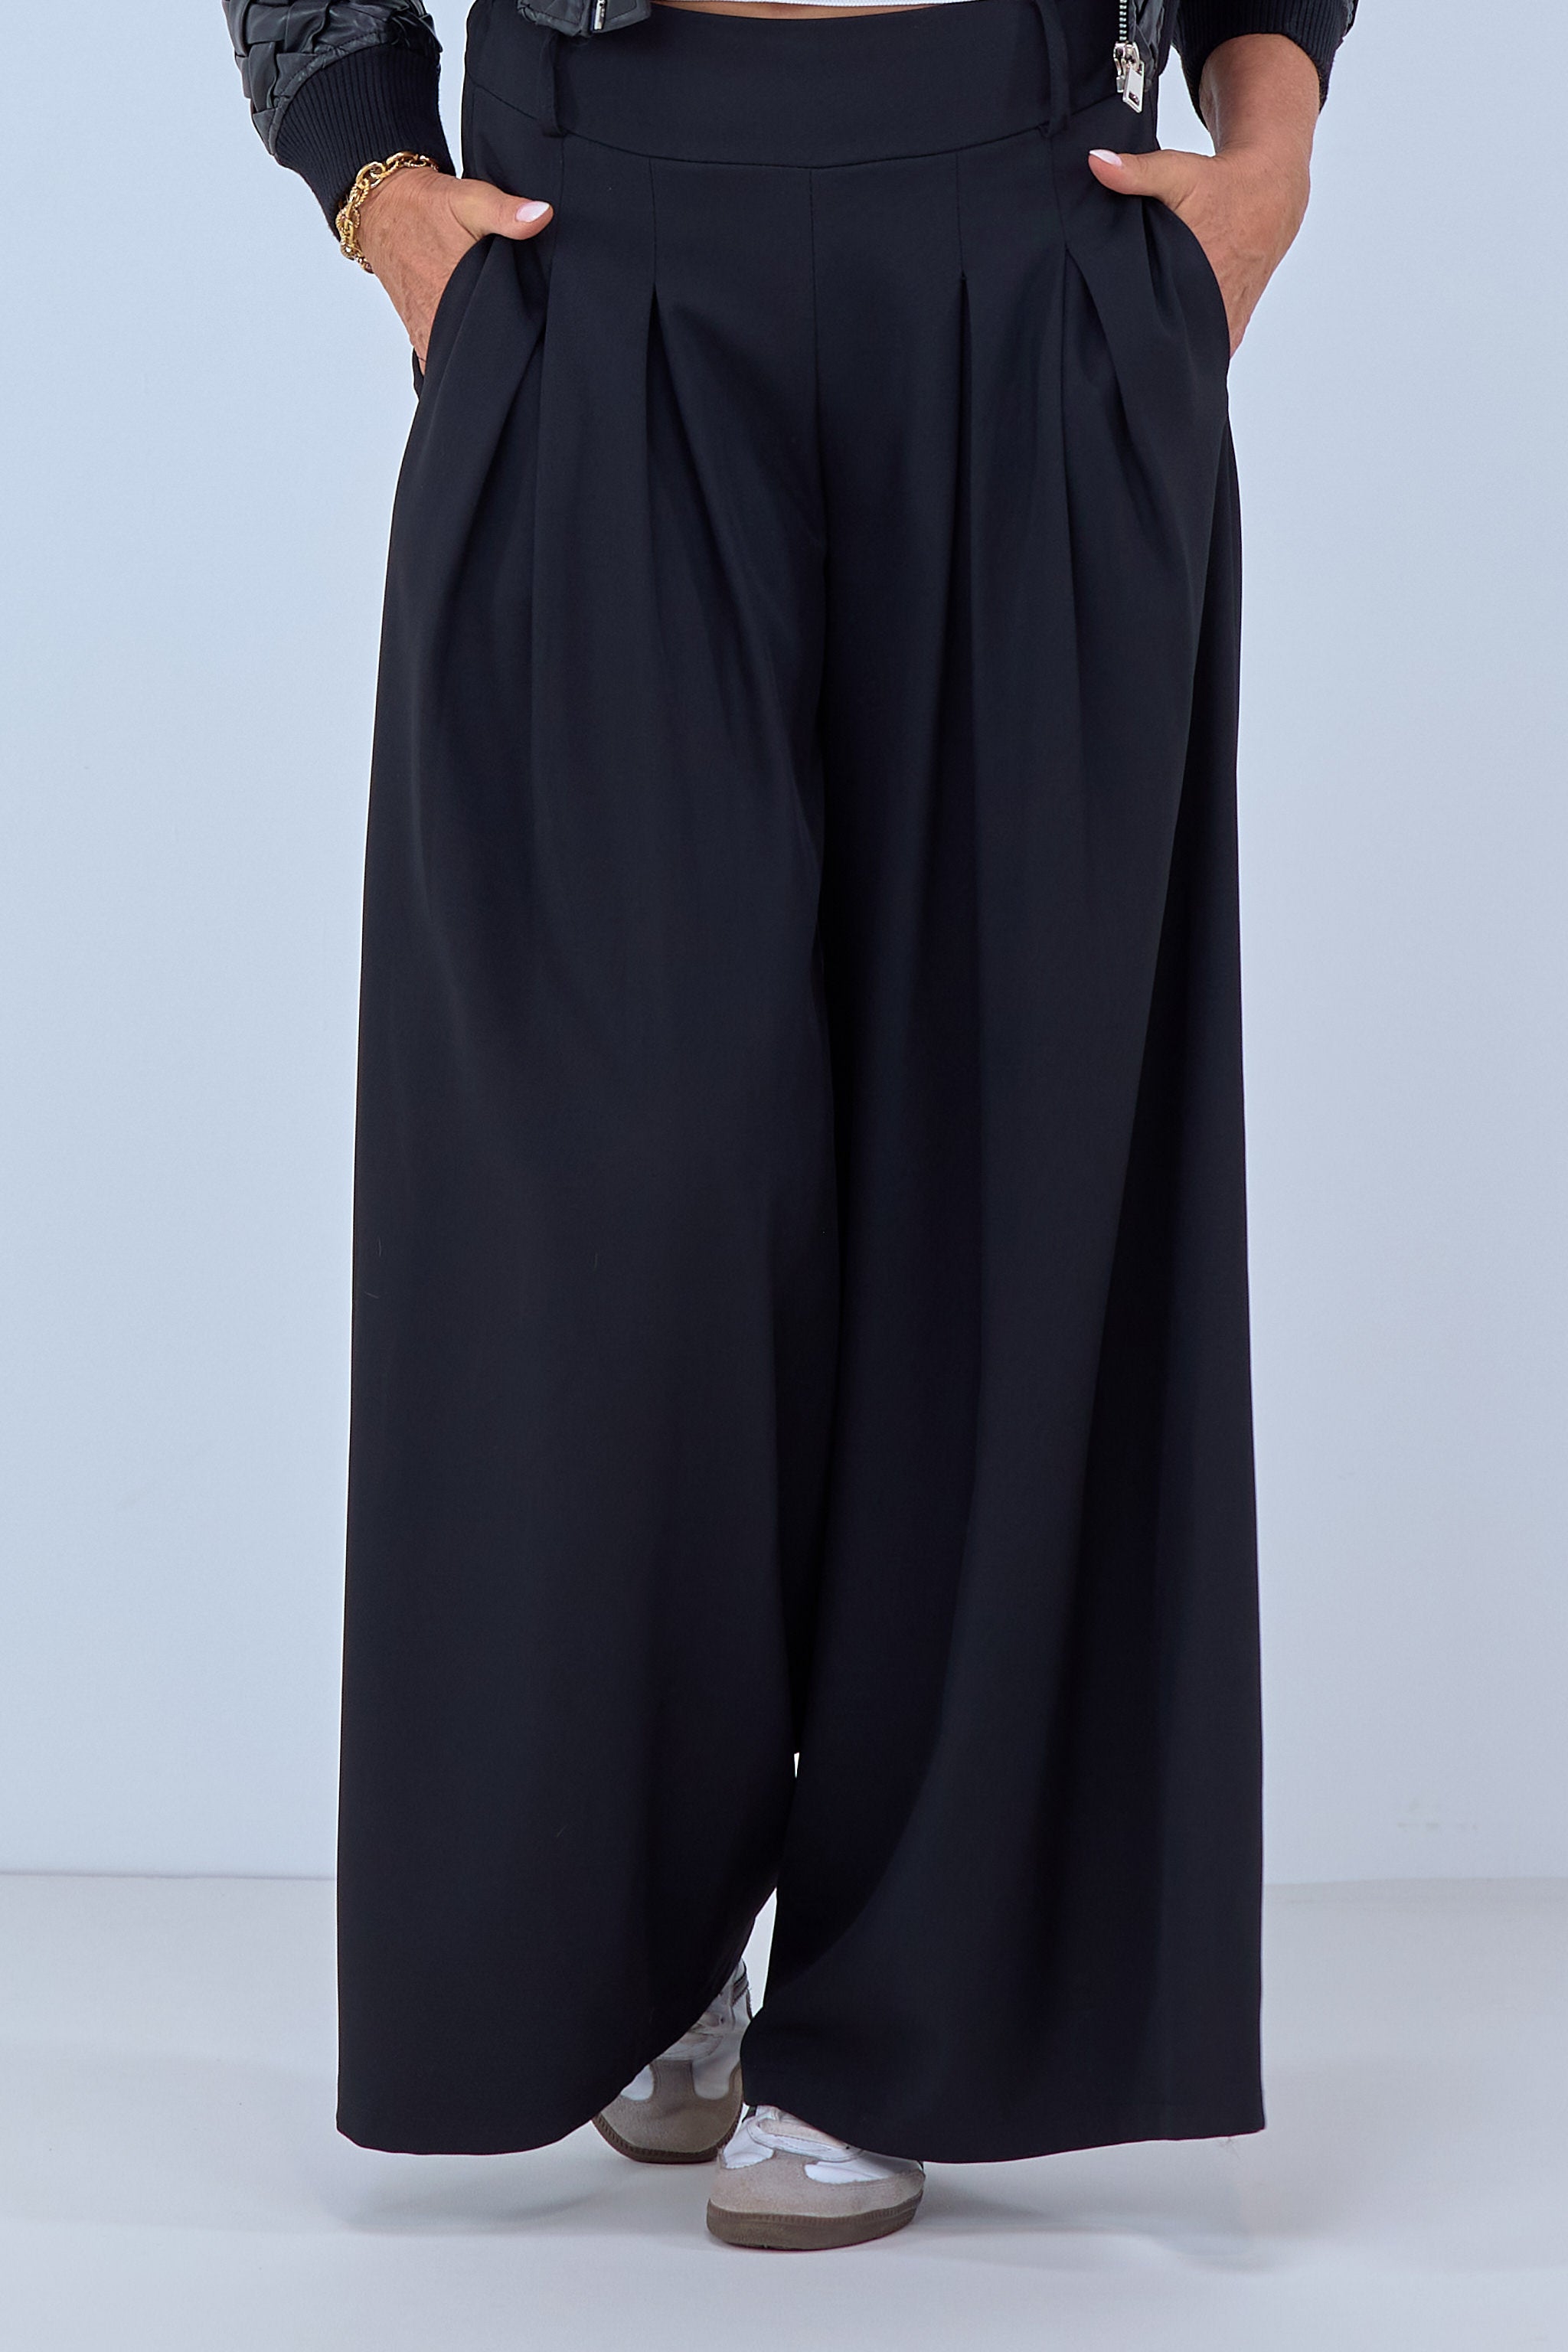 Culottes with pleats, black